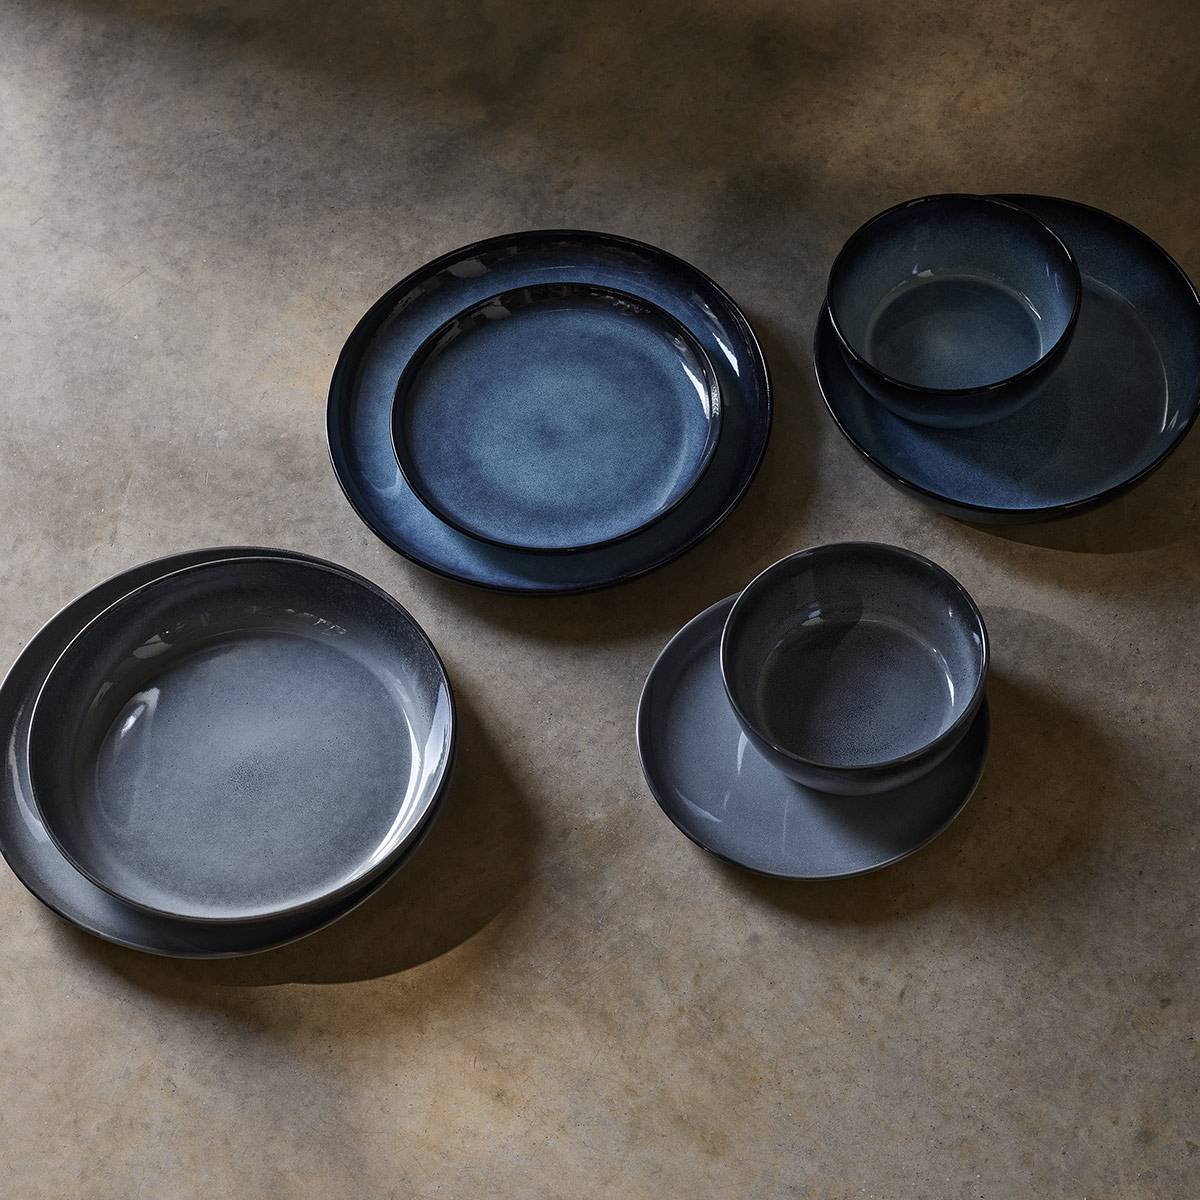  Blue plates and bowls. Shop dinnerware